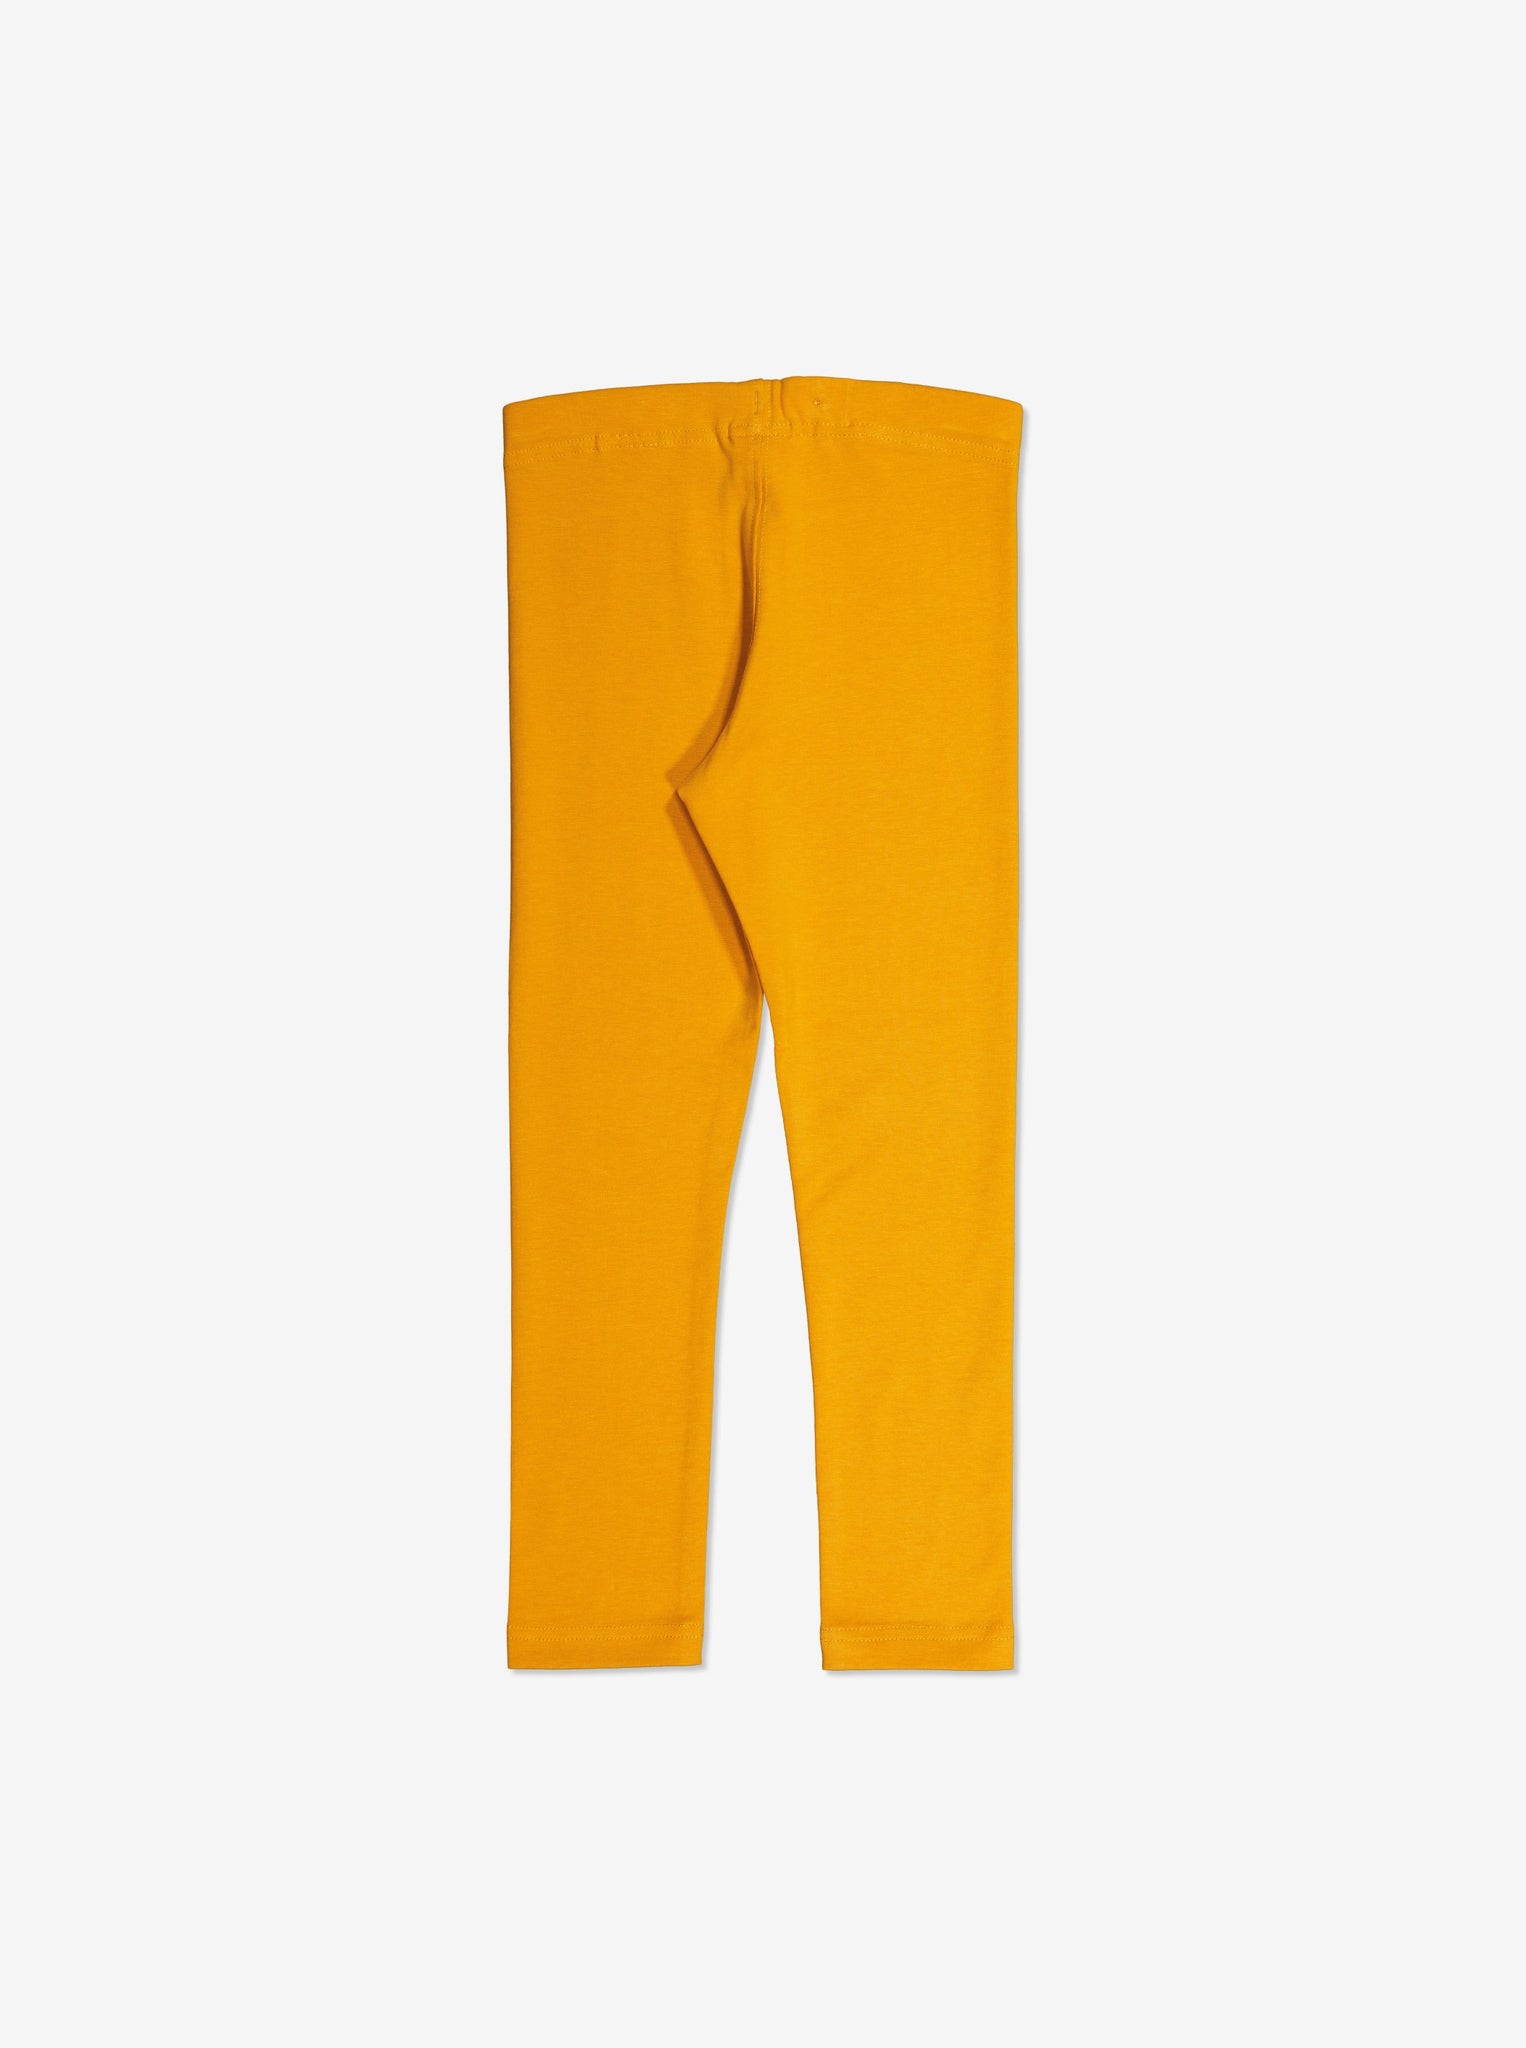  Organic Cotton Yellow Kids Leggings from Polarn O. Pyret Kidswear. Made from sustainable materials.